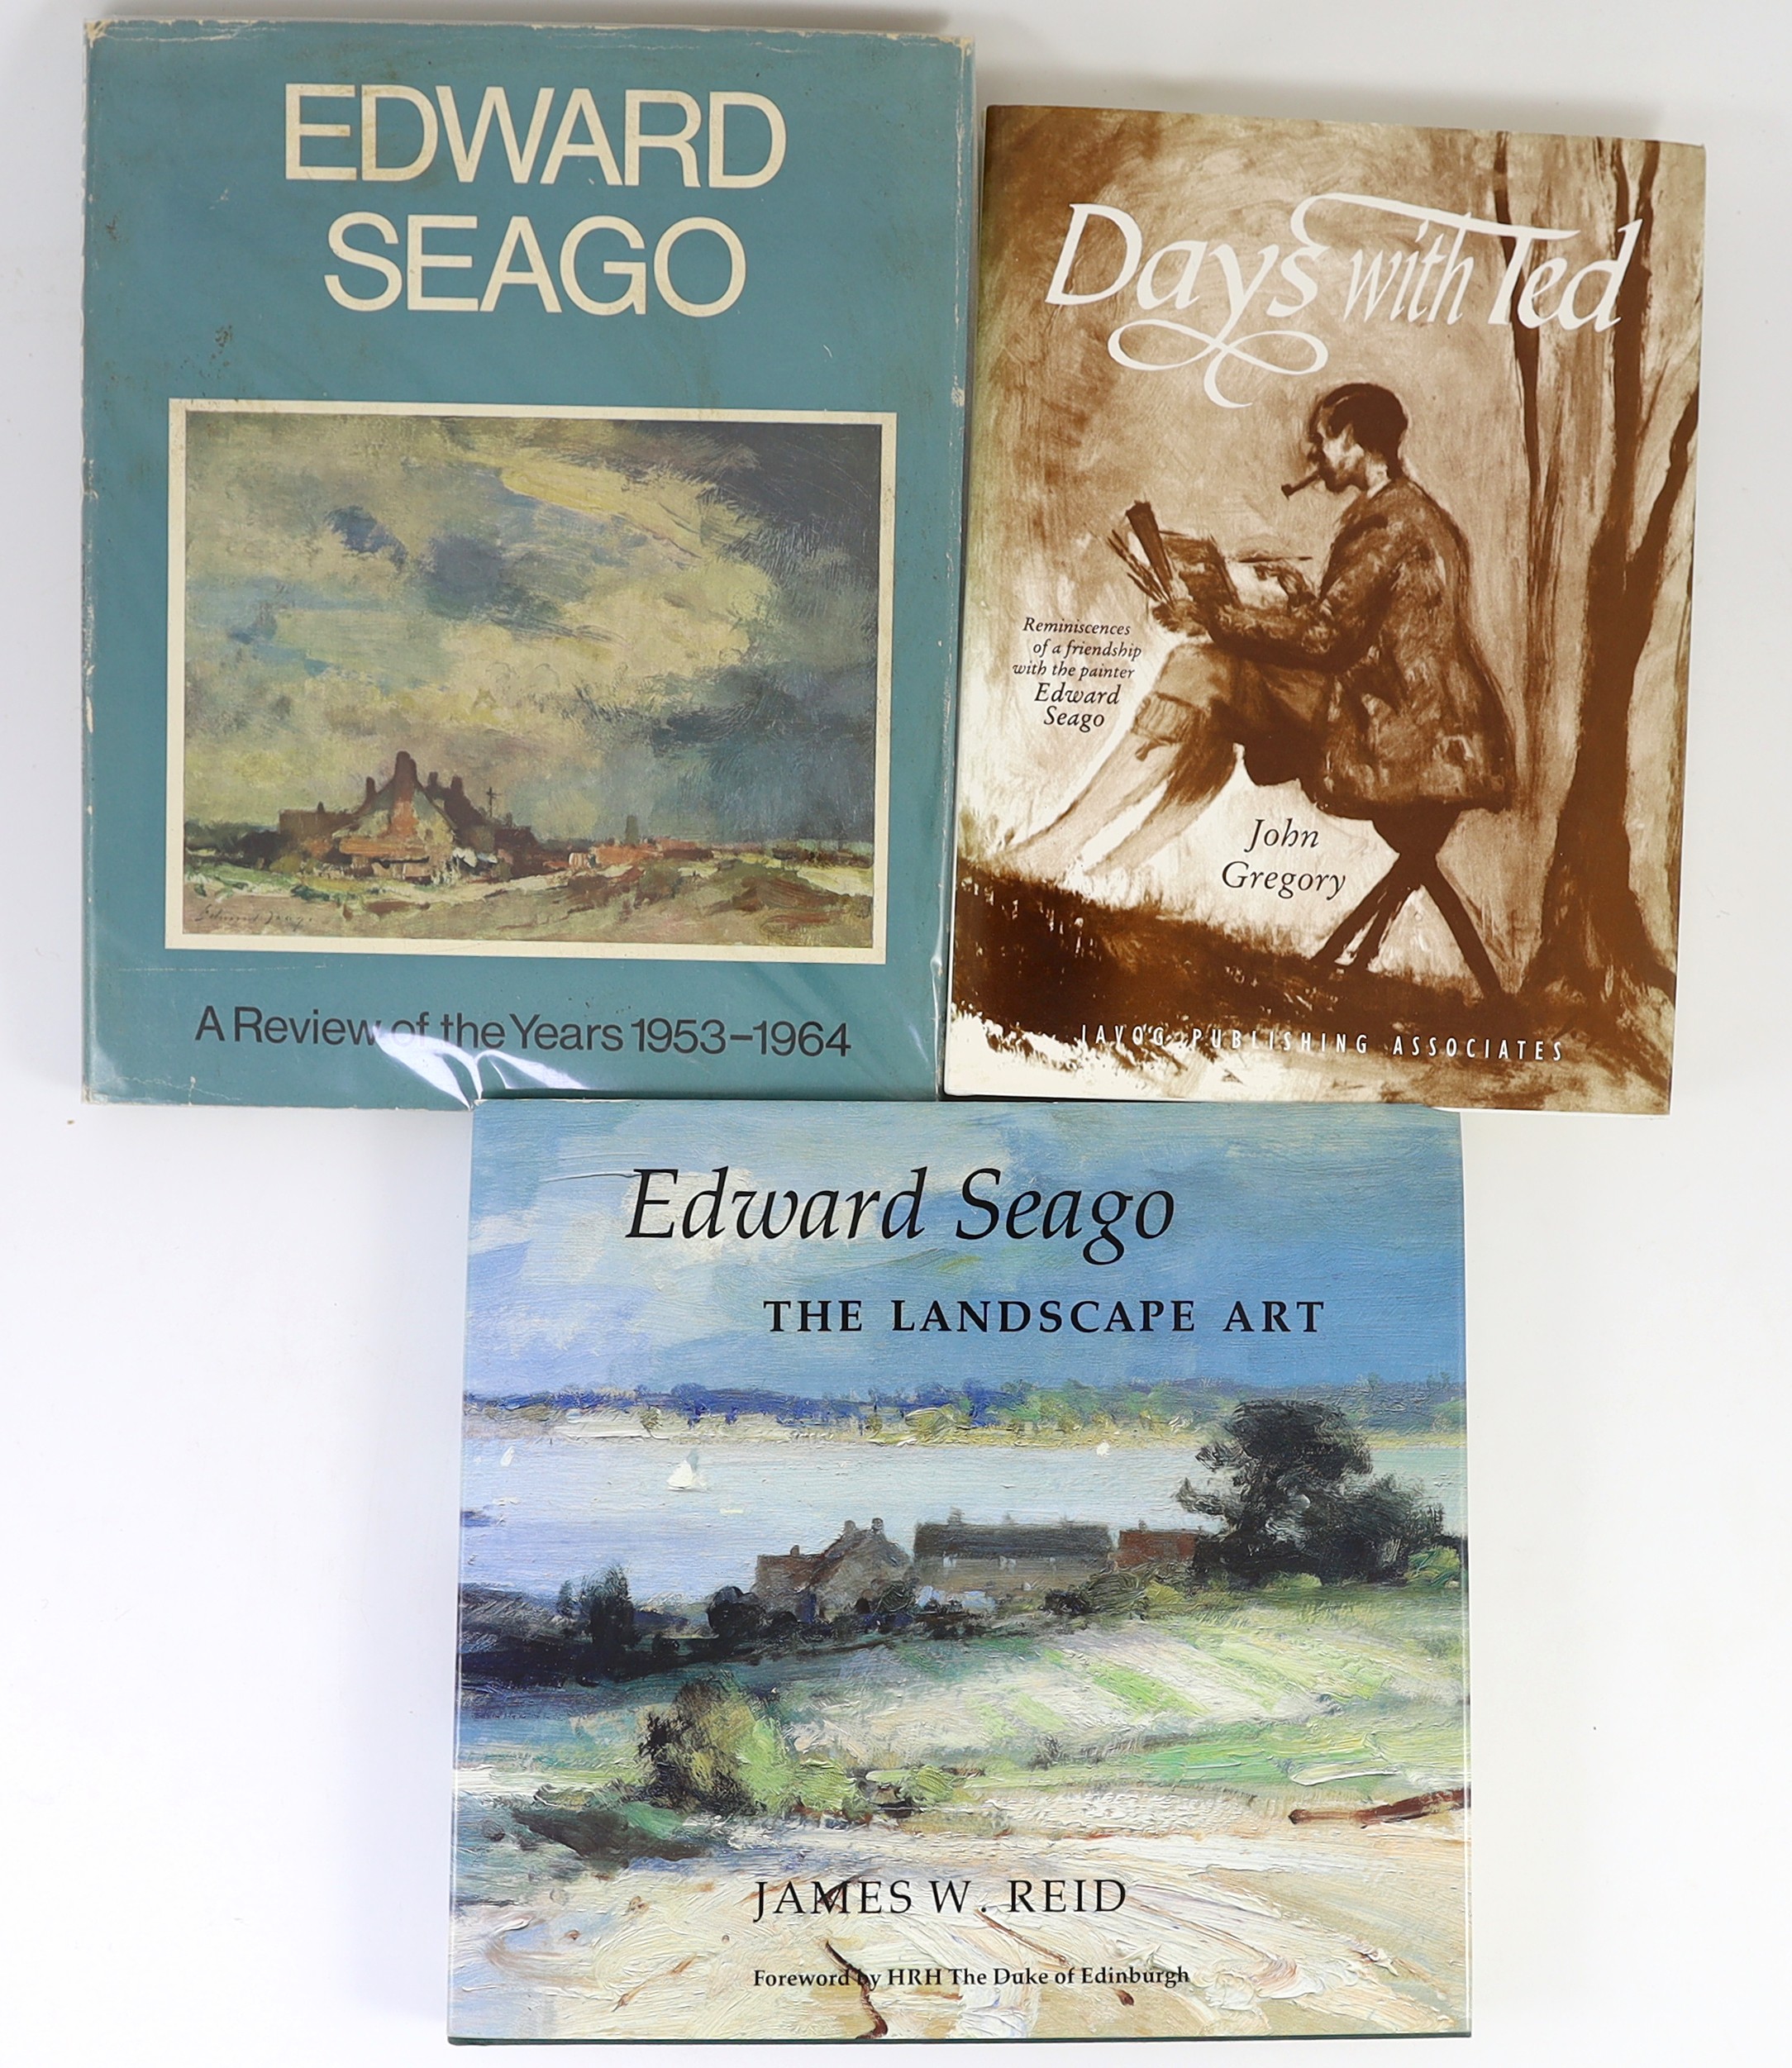 Seago, Edward - 7 works, about or by:- Caravan, Collins, London, 1937; Hawcroft, Francis W. - Edward Seago: A Review of the Years 1953-1964, Collins, London, 1965; Reid, James W. - Edward Seago: The Landscape Art, 1991;